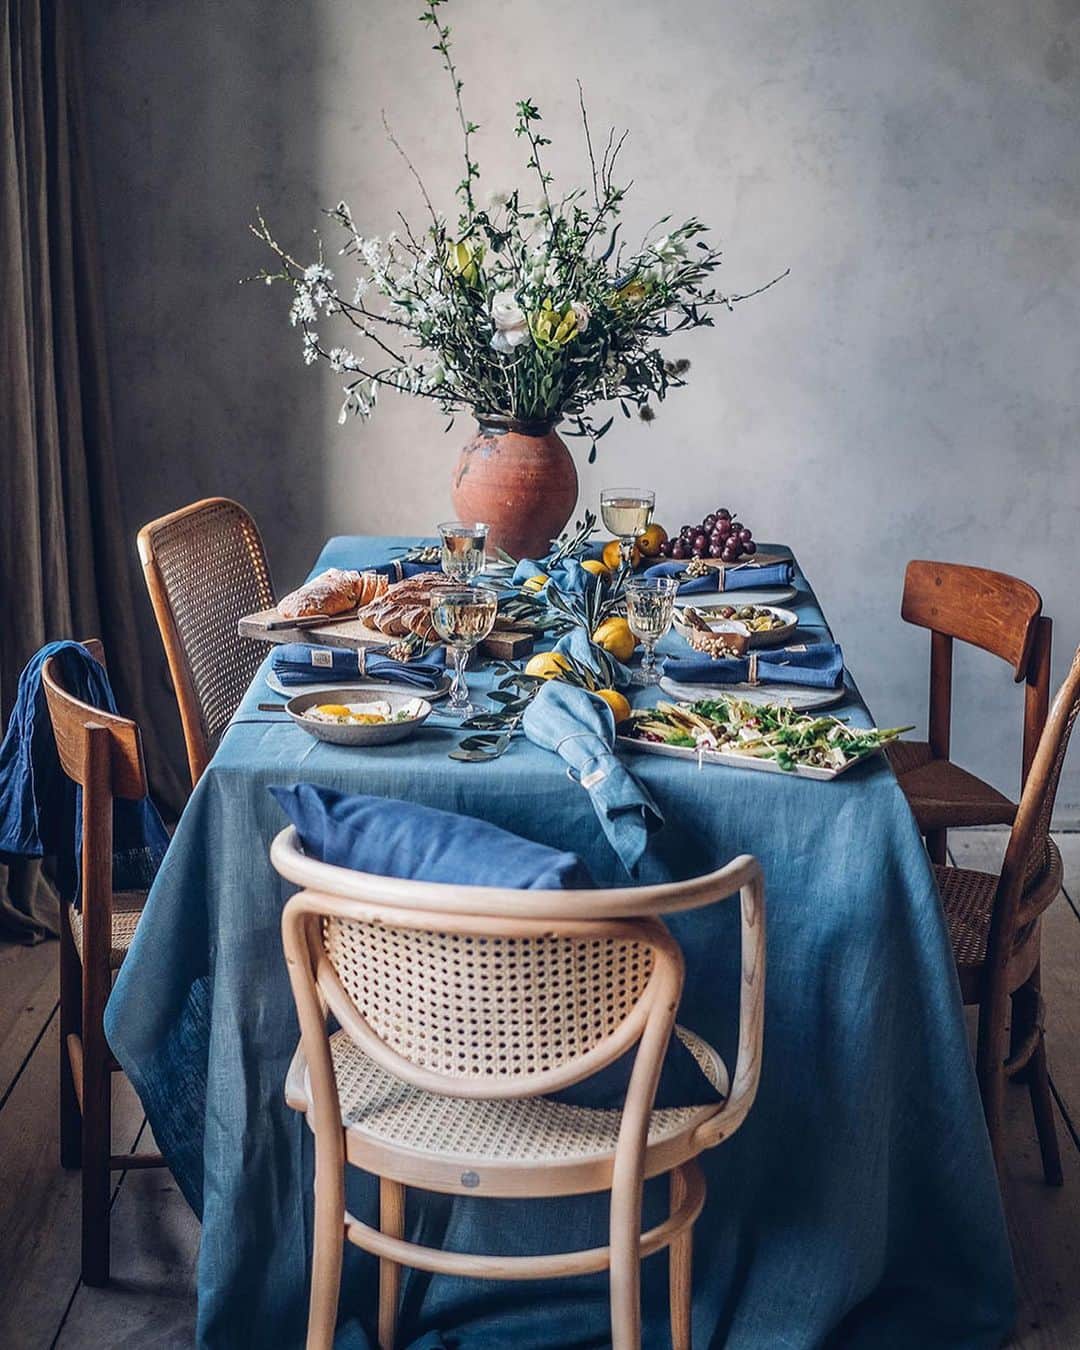 Our Food Storiesのインスタグラム：「Now on the blog - the recipe for a delicious spring salad with grilled fennel 😋 Get the recipe via the link in profile. Happy weekend guys! #ourfoodstoriesstudio  _____ #tablesetting #lovelylinen #linenlove #linenlover #tablelinen #bluelinen #tabledecor #tabledecoration #tabledesign #tabledecorations #tablestyling #onthetable #springtablescape #foodstyling #foodstylist #foodphotographer #bauwerkcolour #limewash #chalkpaint #rusticstyle」